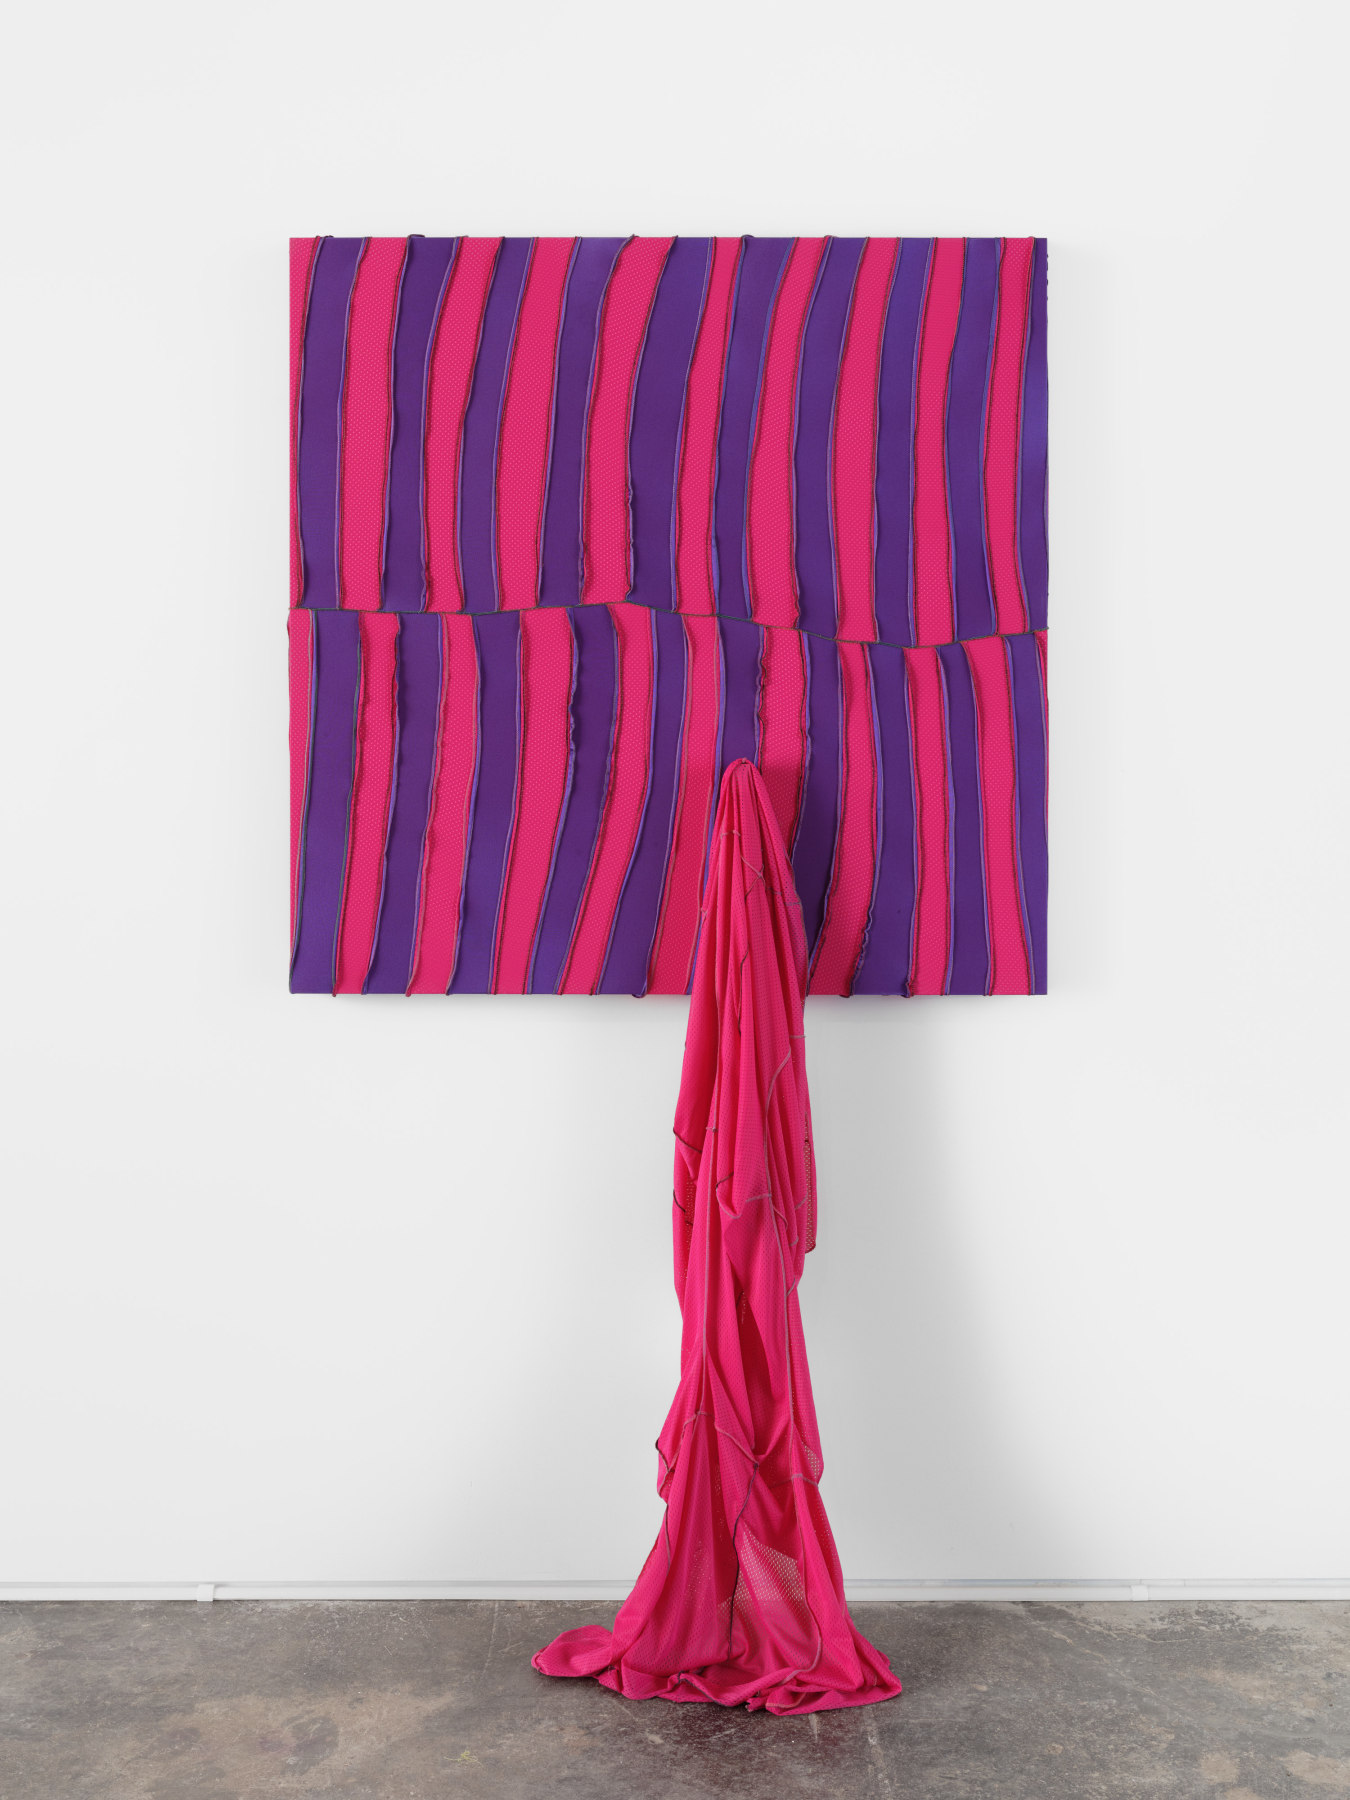 Anthony Olubunmi Akinbola artwork titled "Guess This Flavor". Pink and purple durags sewn together with a loose pink swath cascading down to the floor. 88 x 48 x 7 1/2 in (223.5 x 121.9 x 19 cm), durags on aluminum and wood frame, 2023.